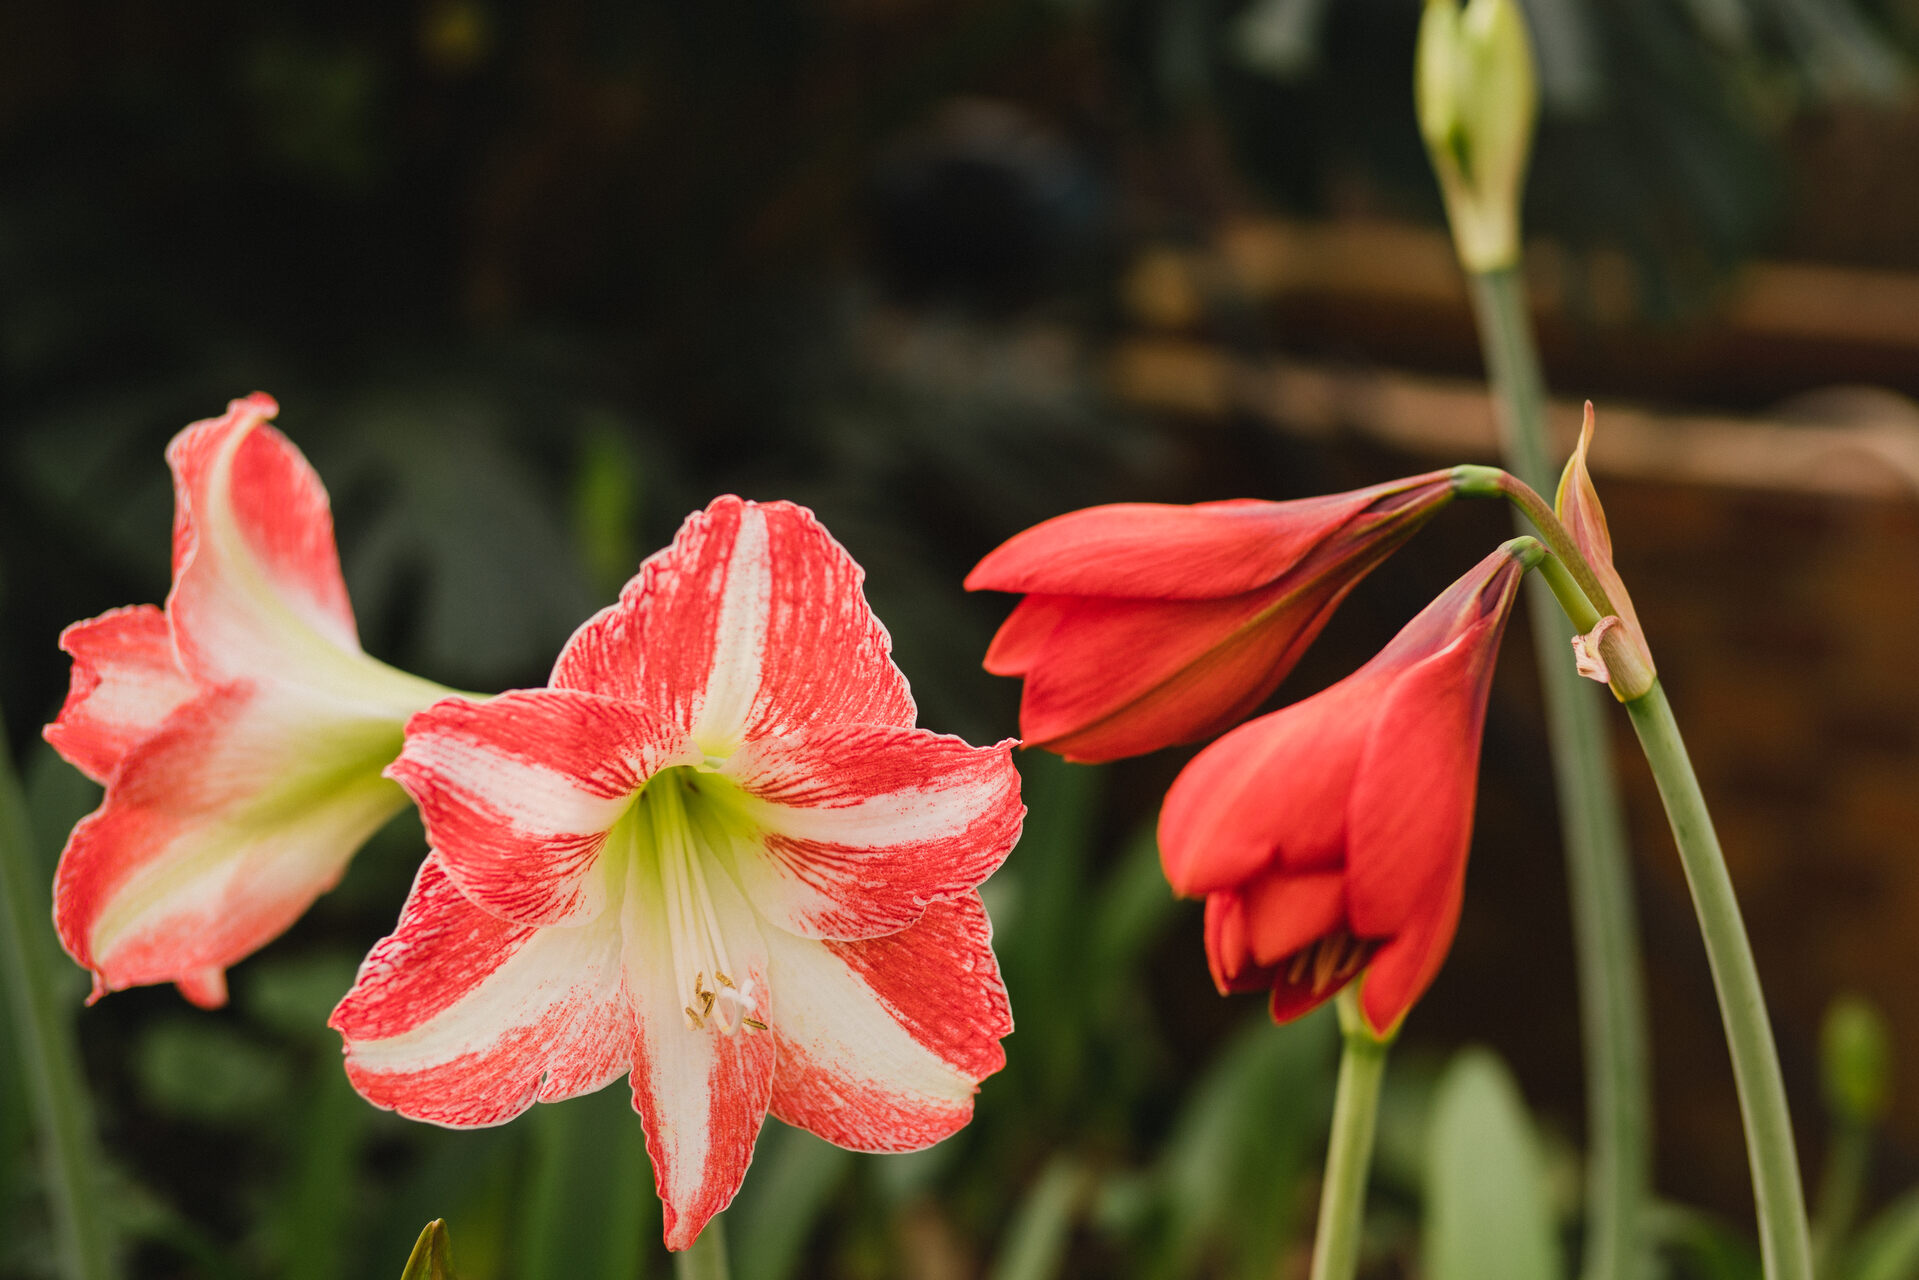 Red amaryllis flowers blooming outdoors